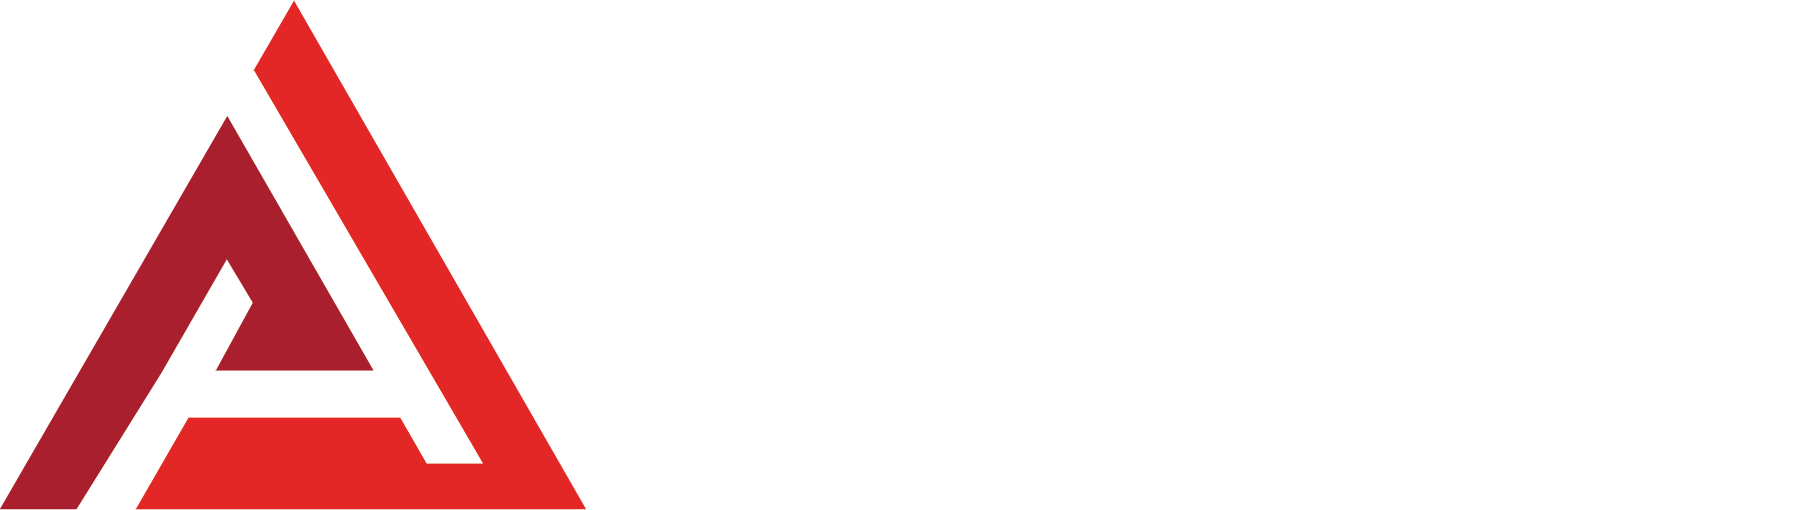 ADVANCED ROOF SOLUTIONS